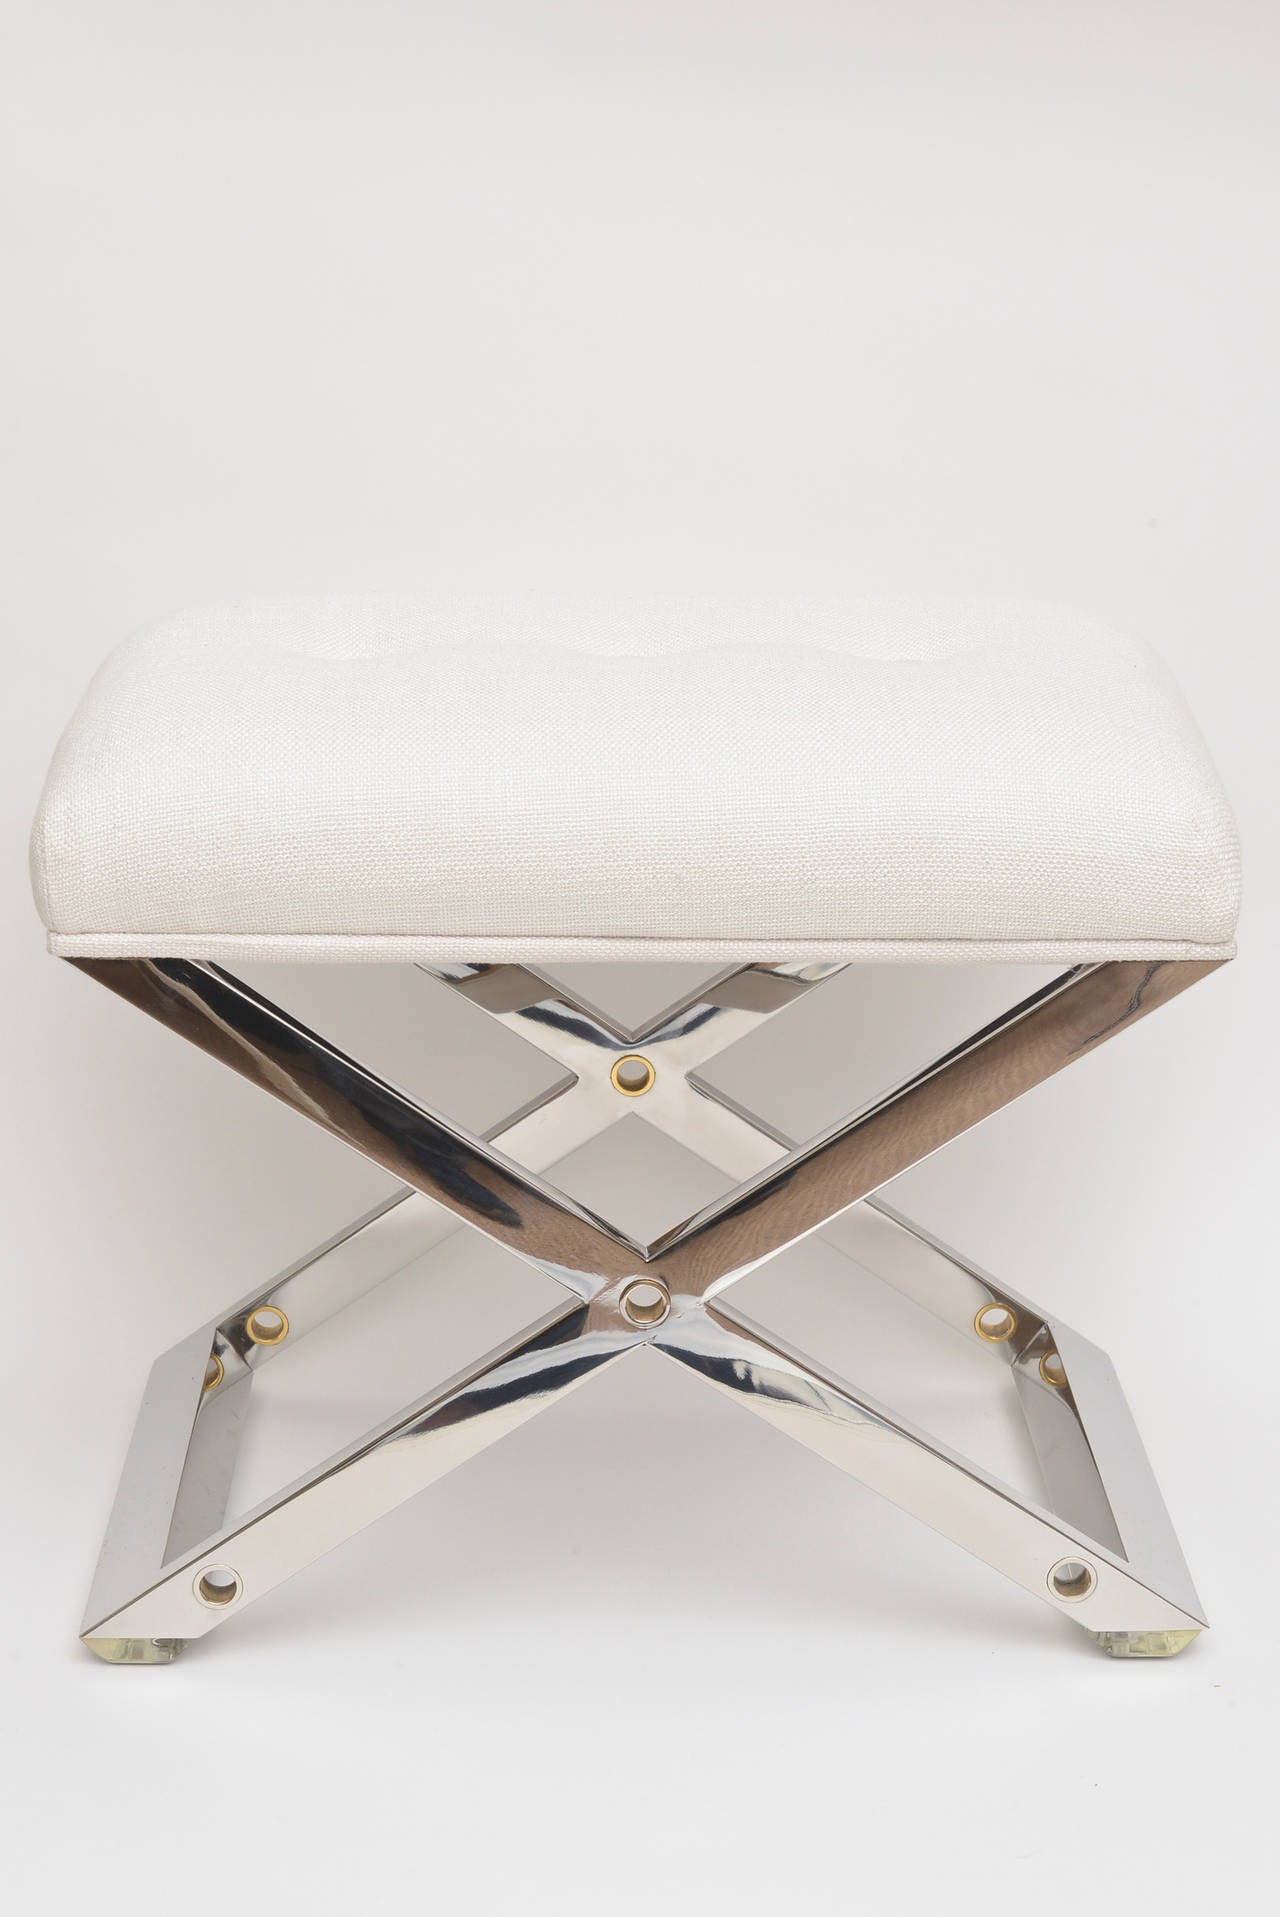 This moderne chic and timeless X-framed bench attributed to Karl Springer is chrome-plated steel and brass holed inserts. It is wonderful for a vanity, bedroom and even a closet.
It has been newly upholstered with a fine white silk or linen weaved